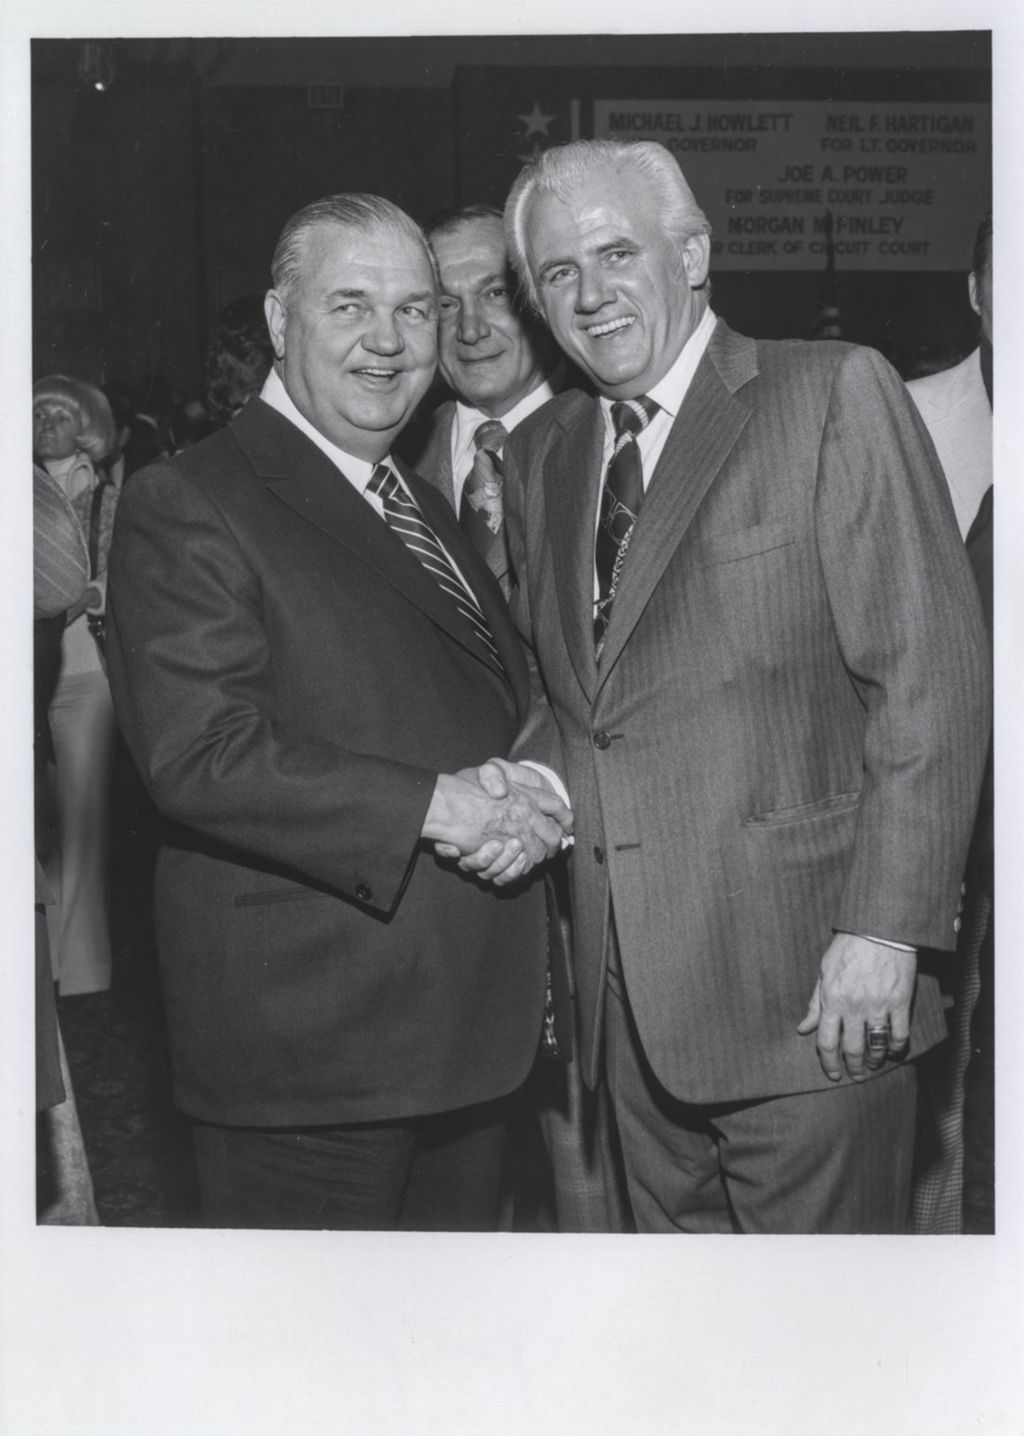 Miniature of Michael J. Howlett shaking hands with an man at a Democratic Club of Winnetka event